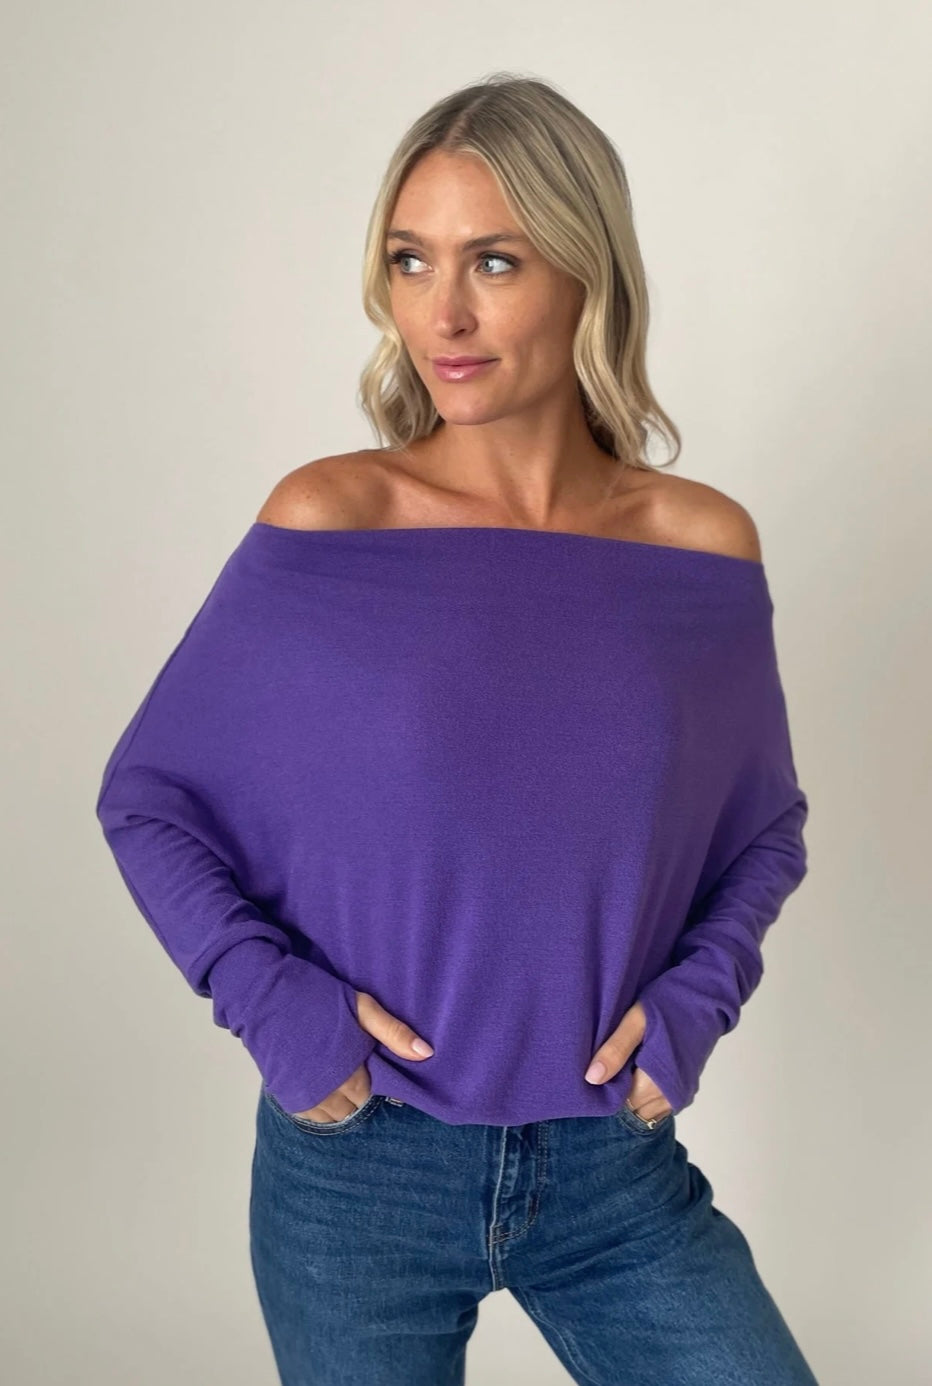 Six Fifty Clothing Company The Anywhere Top Royal Purple